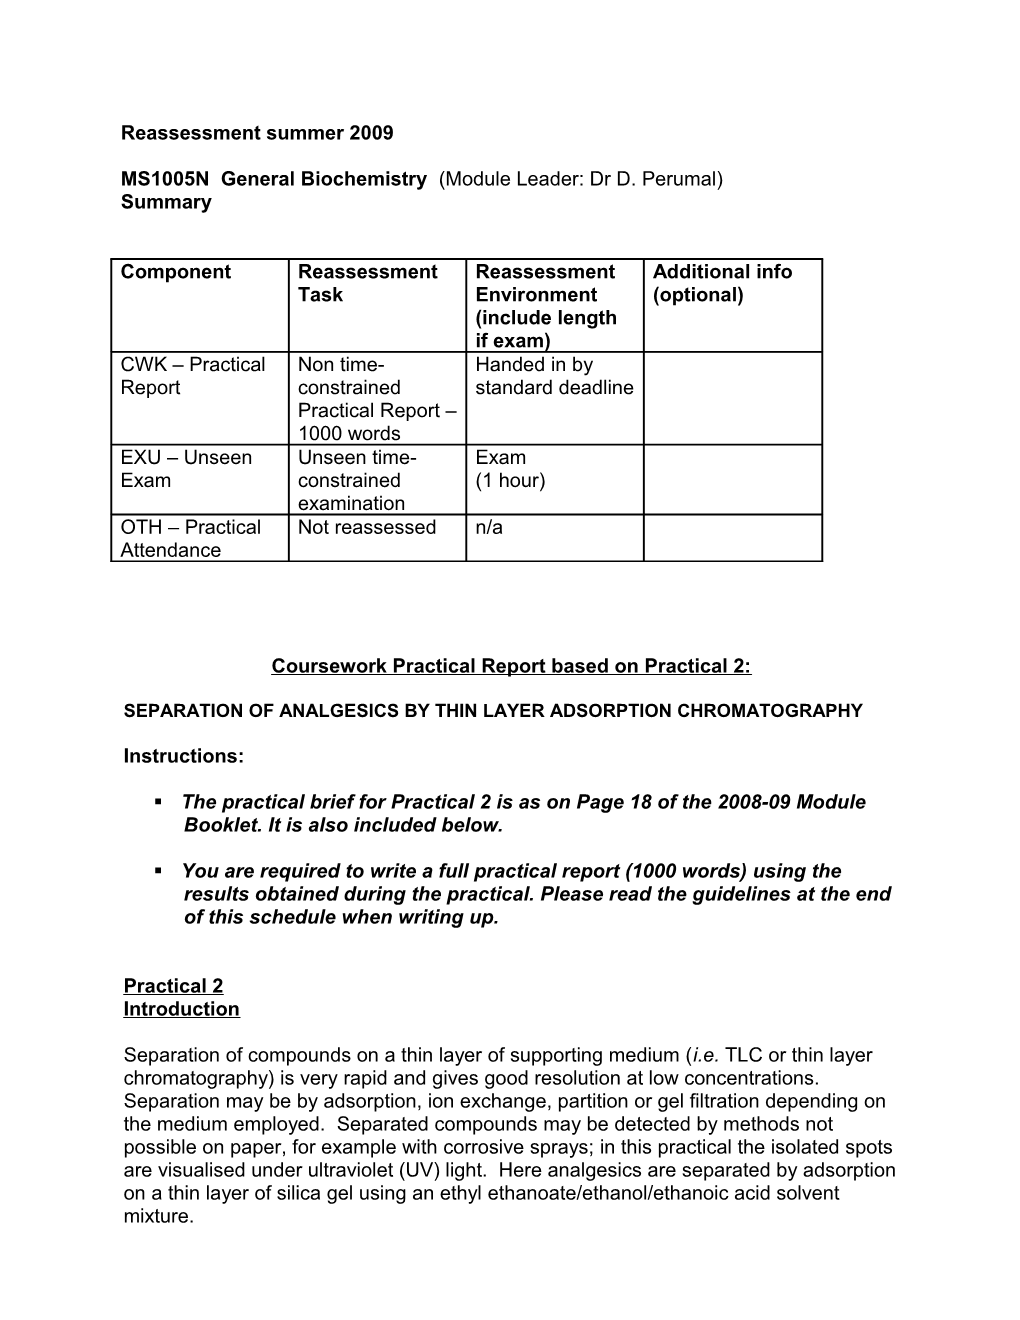 Coursework Practical Report Based on Practical 2